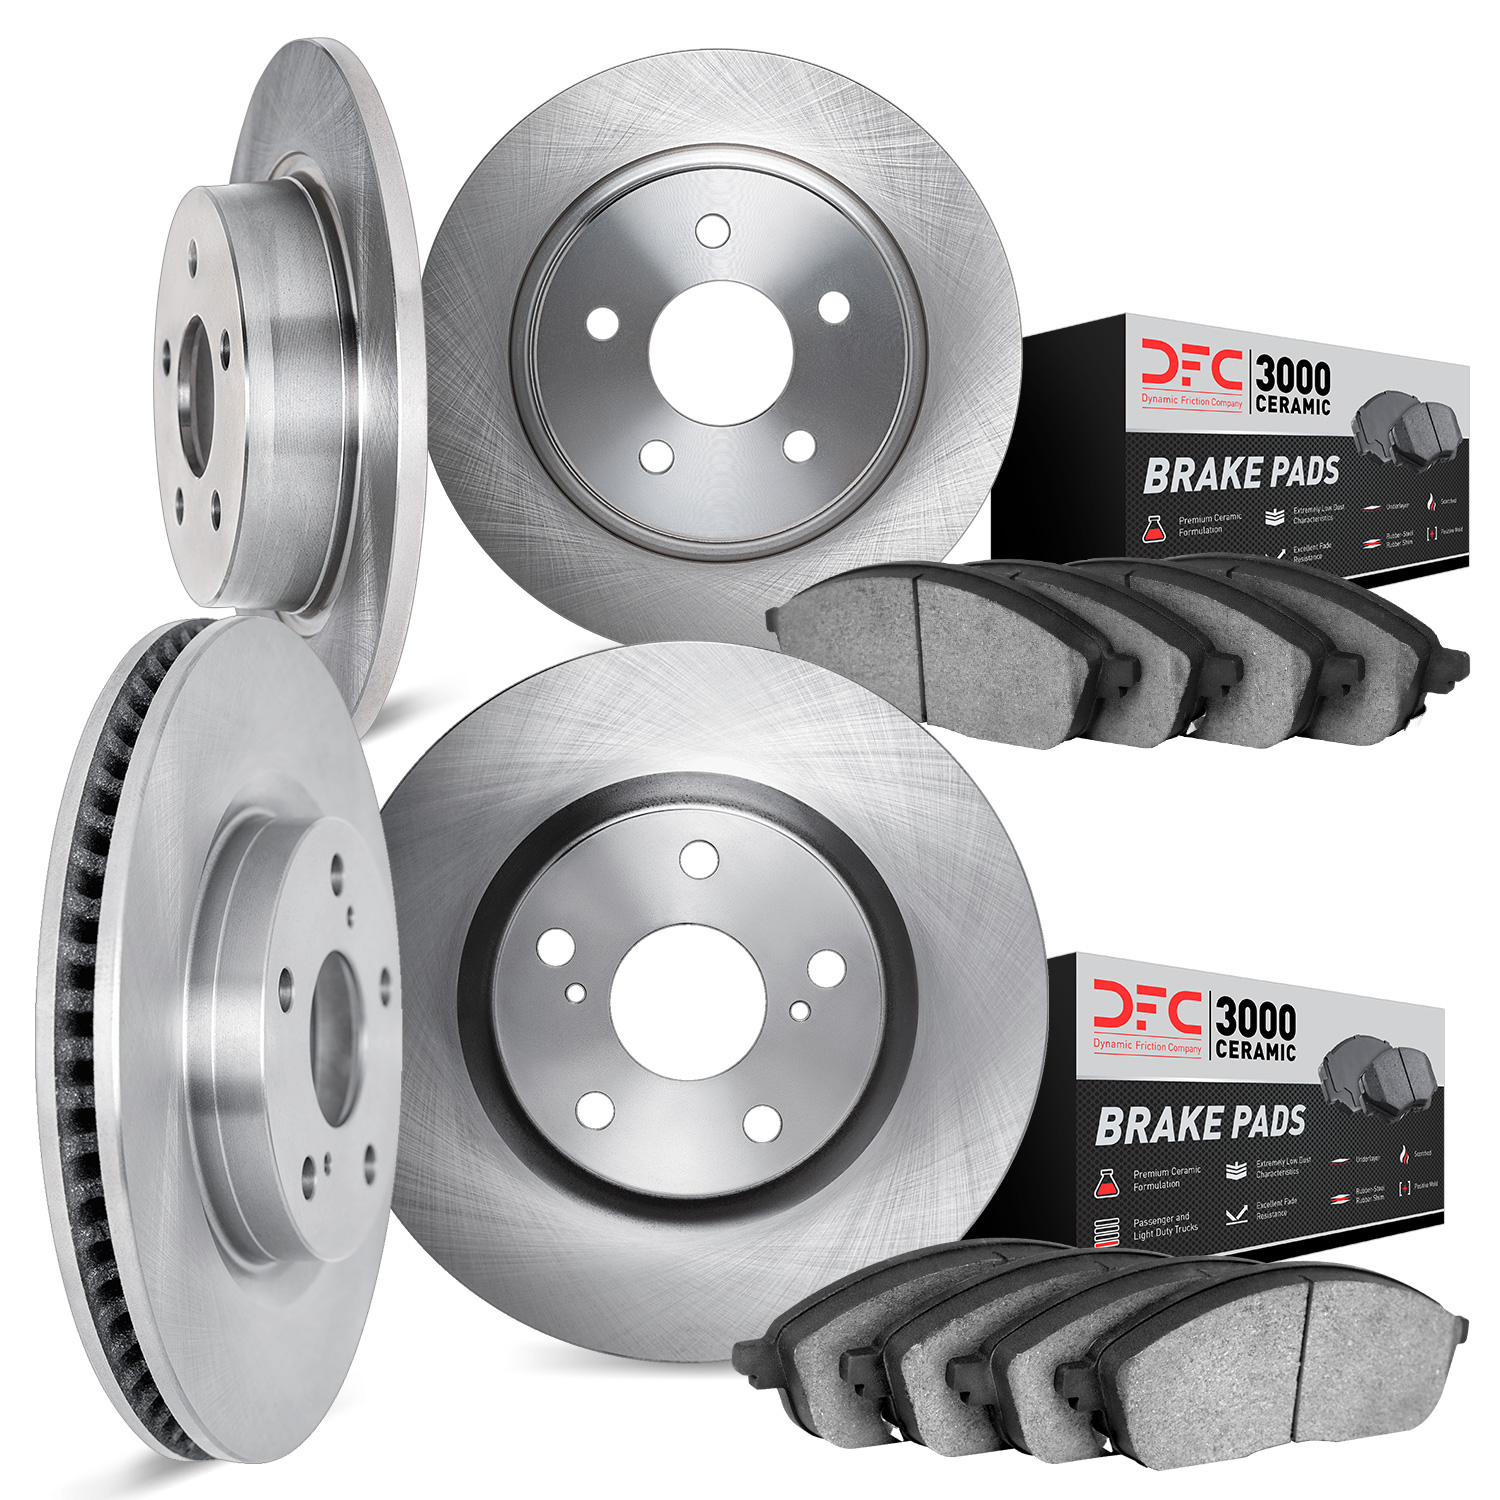 6304-76102 Brake Rotors with 3000-Series Ceramic Brake Pads Kit, Fits Select Lexus/Toyota/Scion, Position: Front and Rear